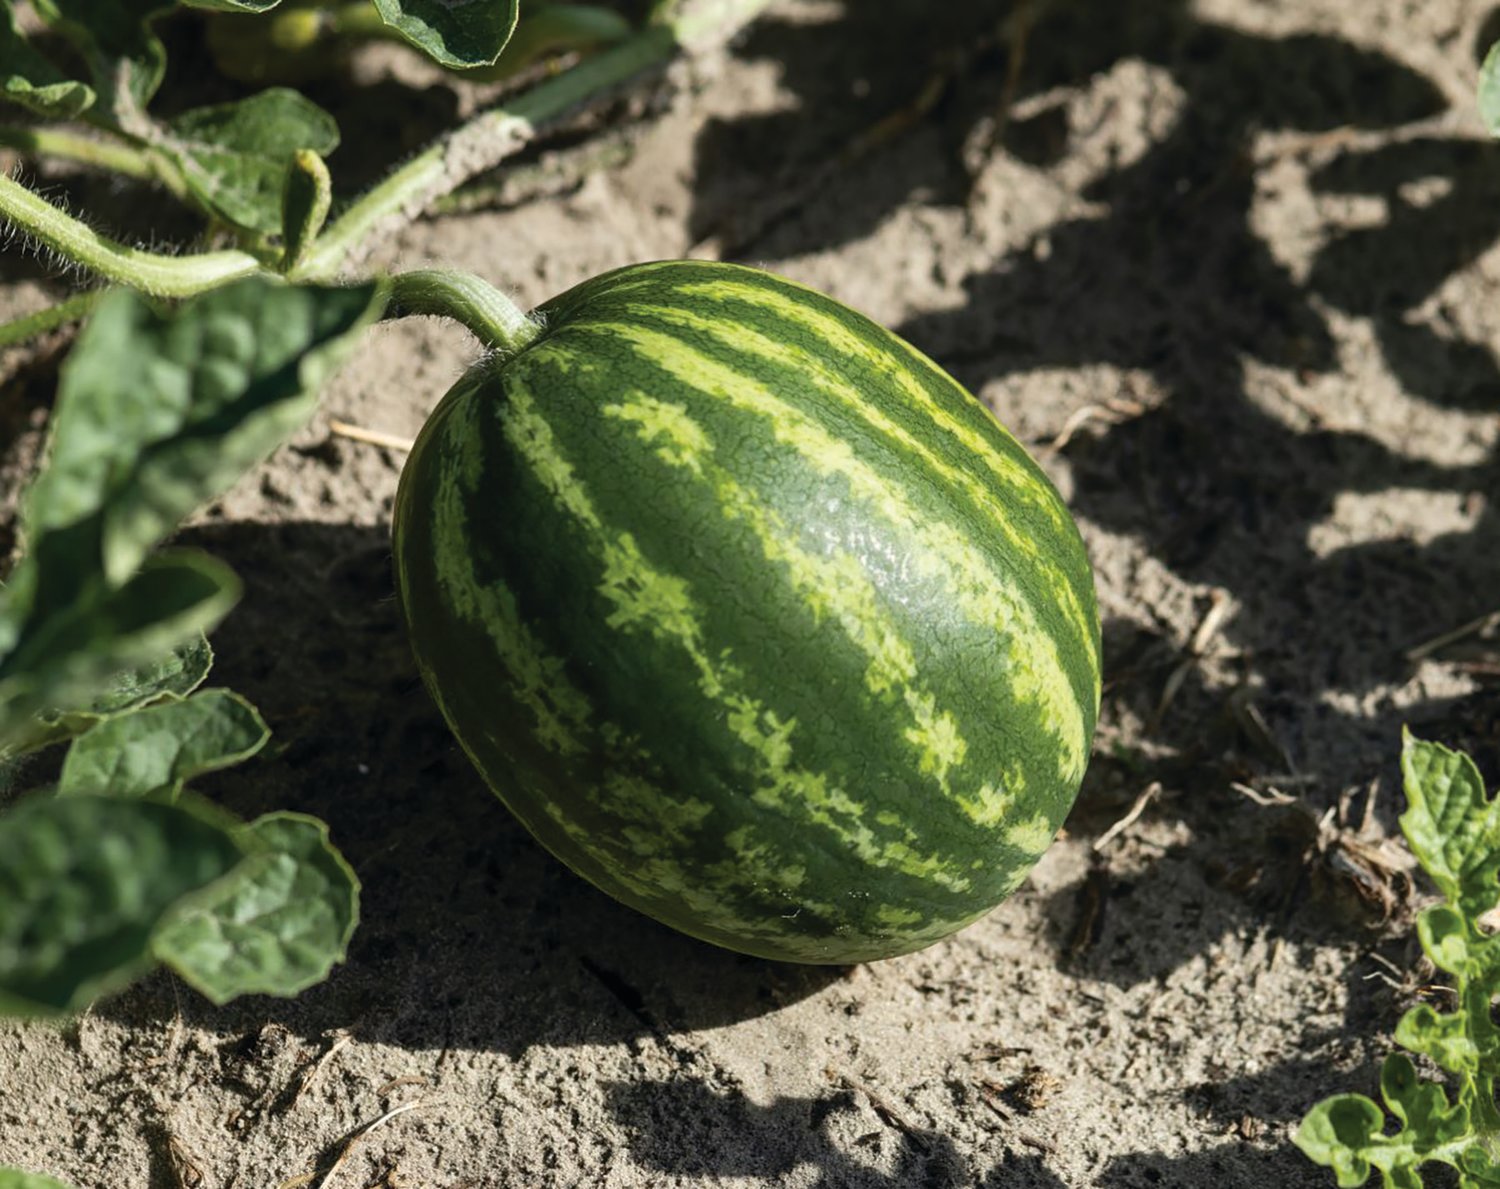 This picture is of a watermelon in the field.